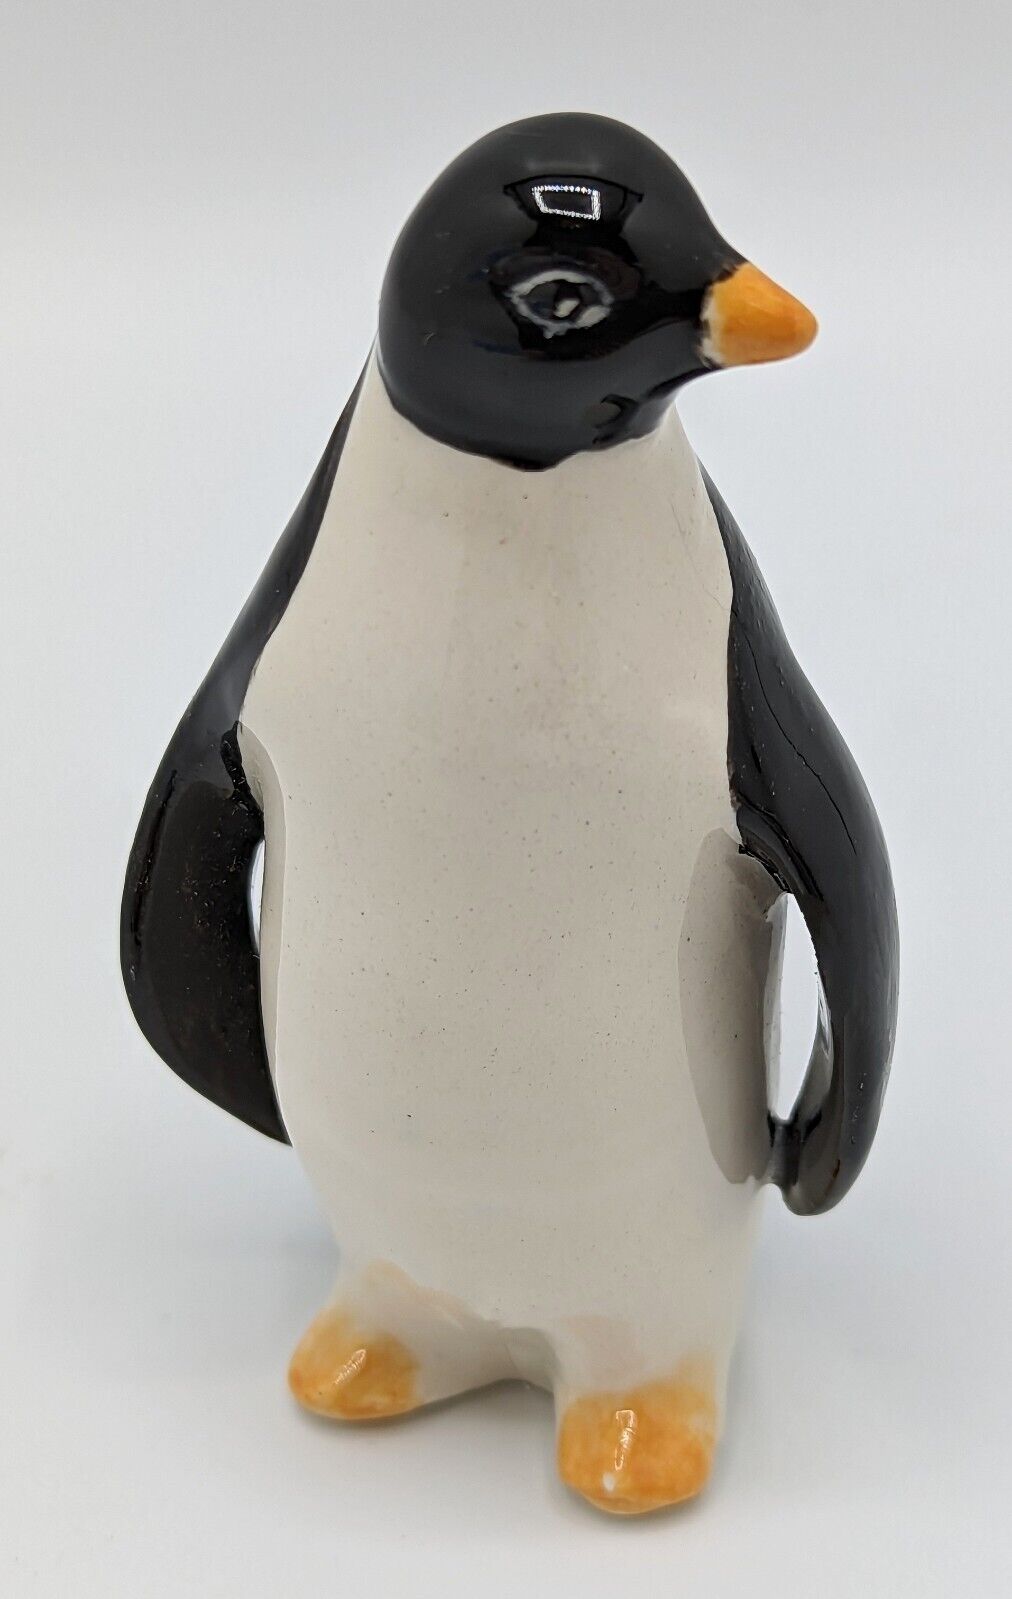 Porcelain Penguin Figurine Hand Painted 2.75 in Yellow Feet Black Head